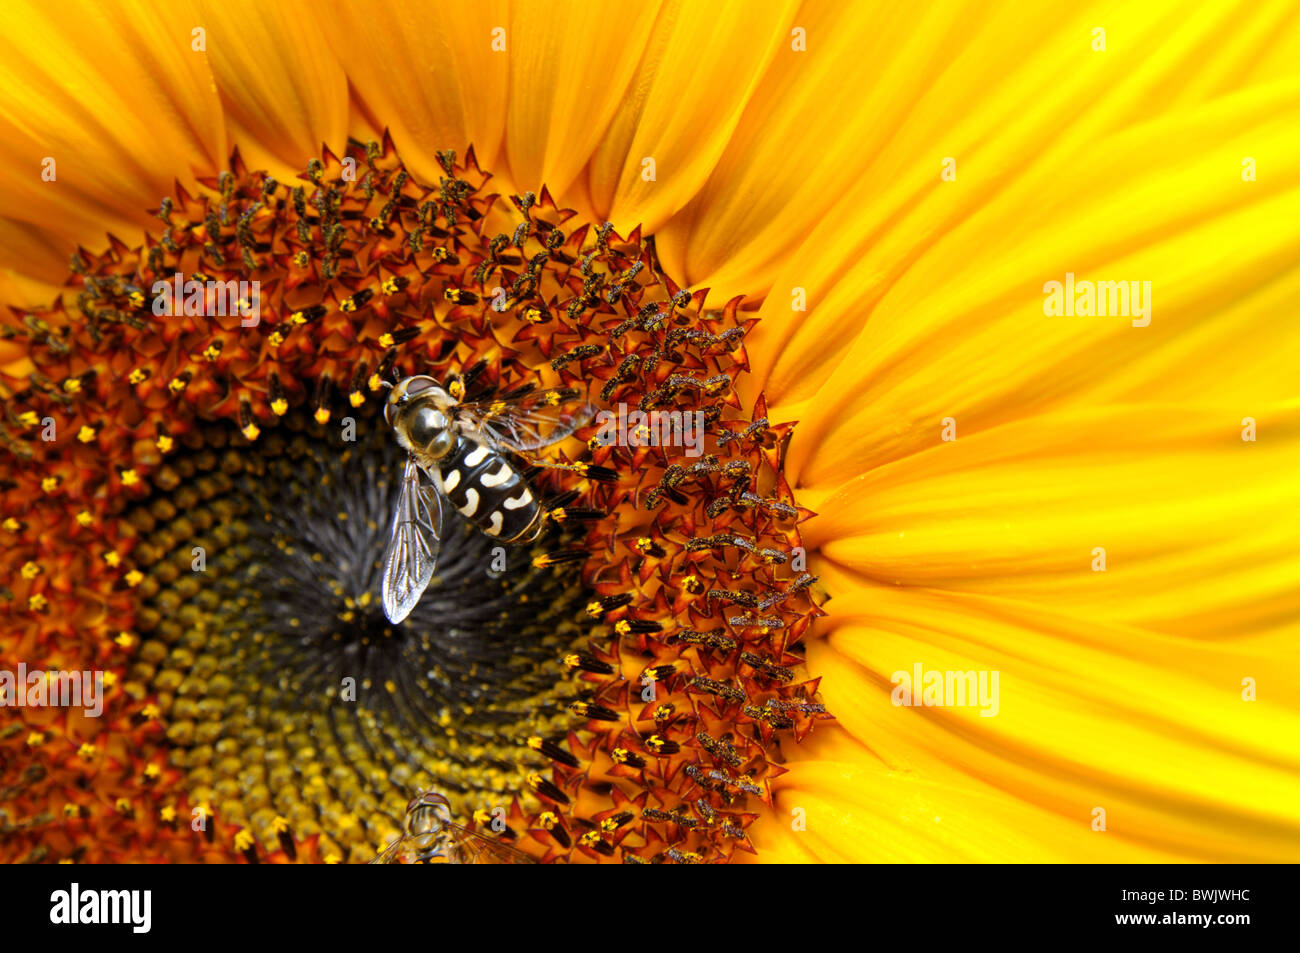 hover fly visiting sunflower Stock Photo